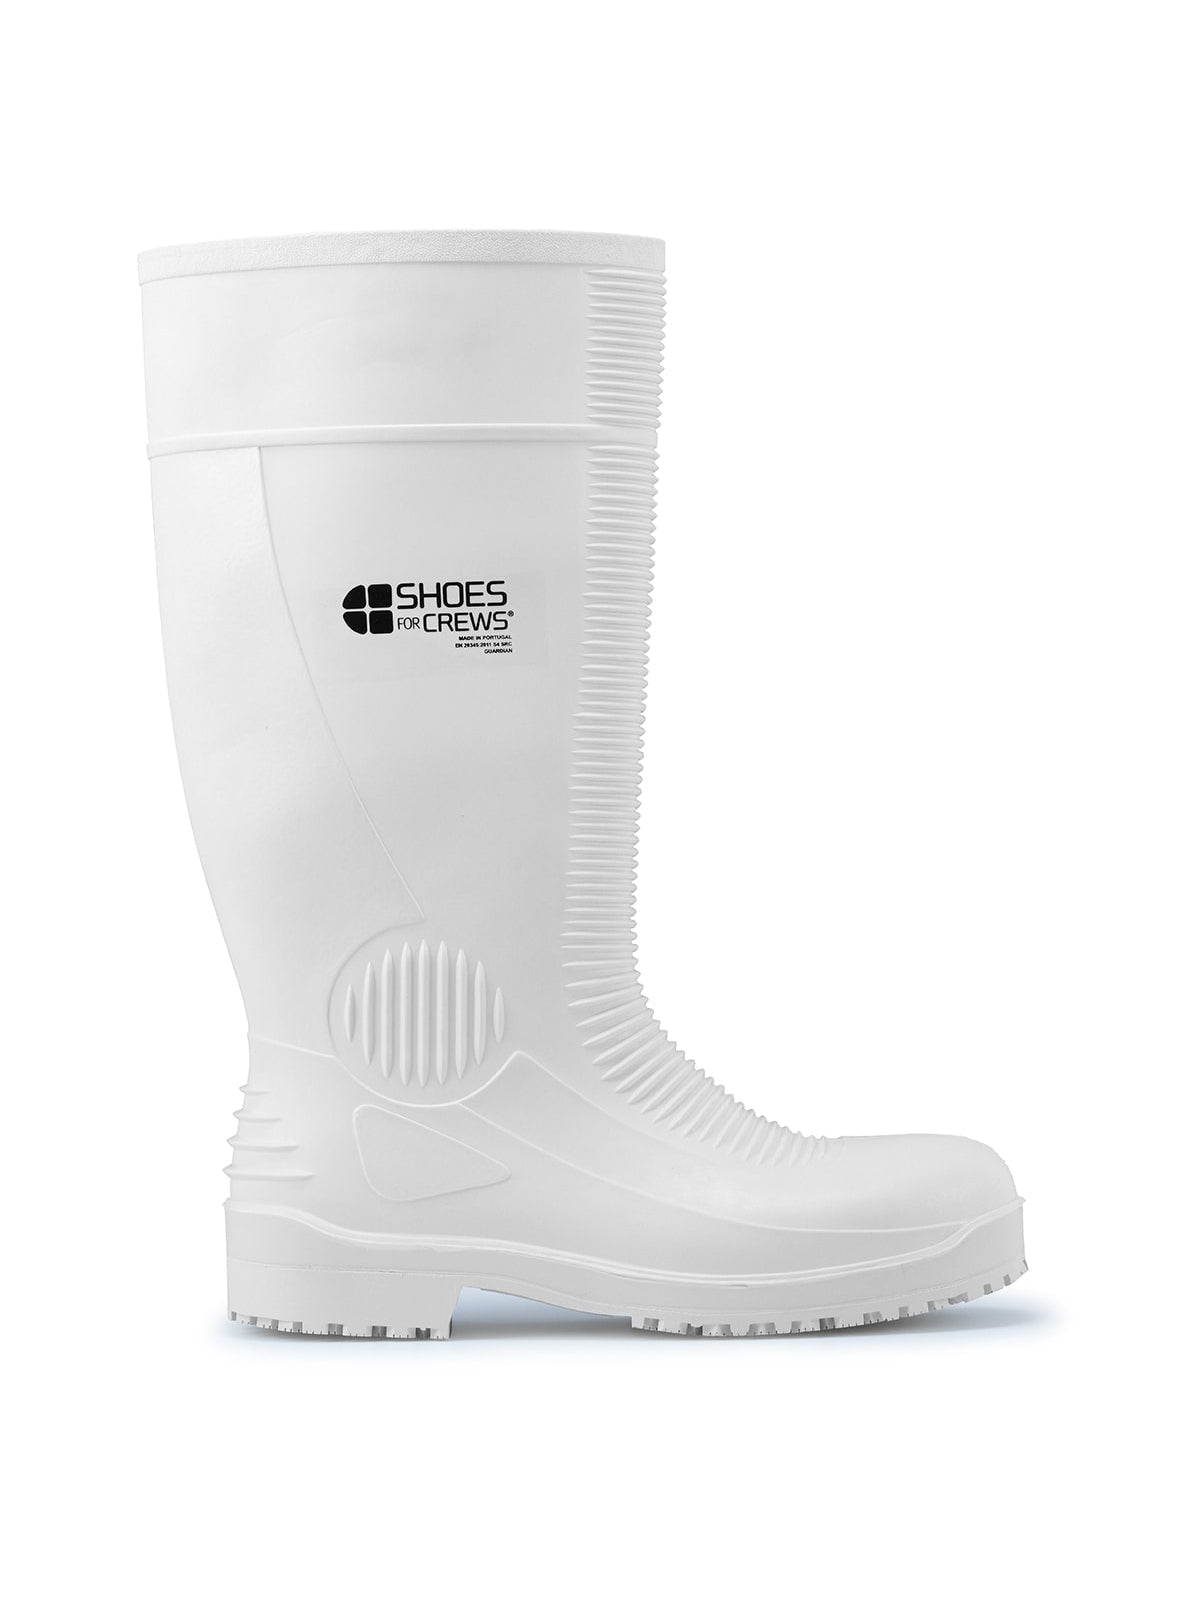 Unisex Safety Boot Guardian White (S4) by Shoes For Crews -  ChefsCotton